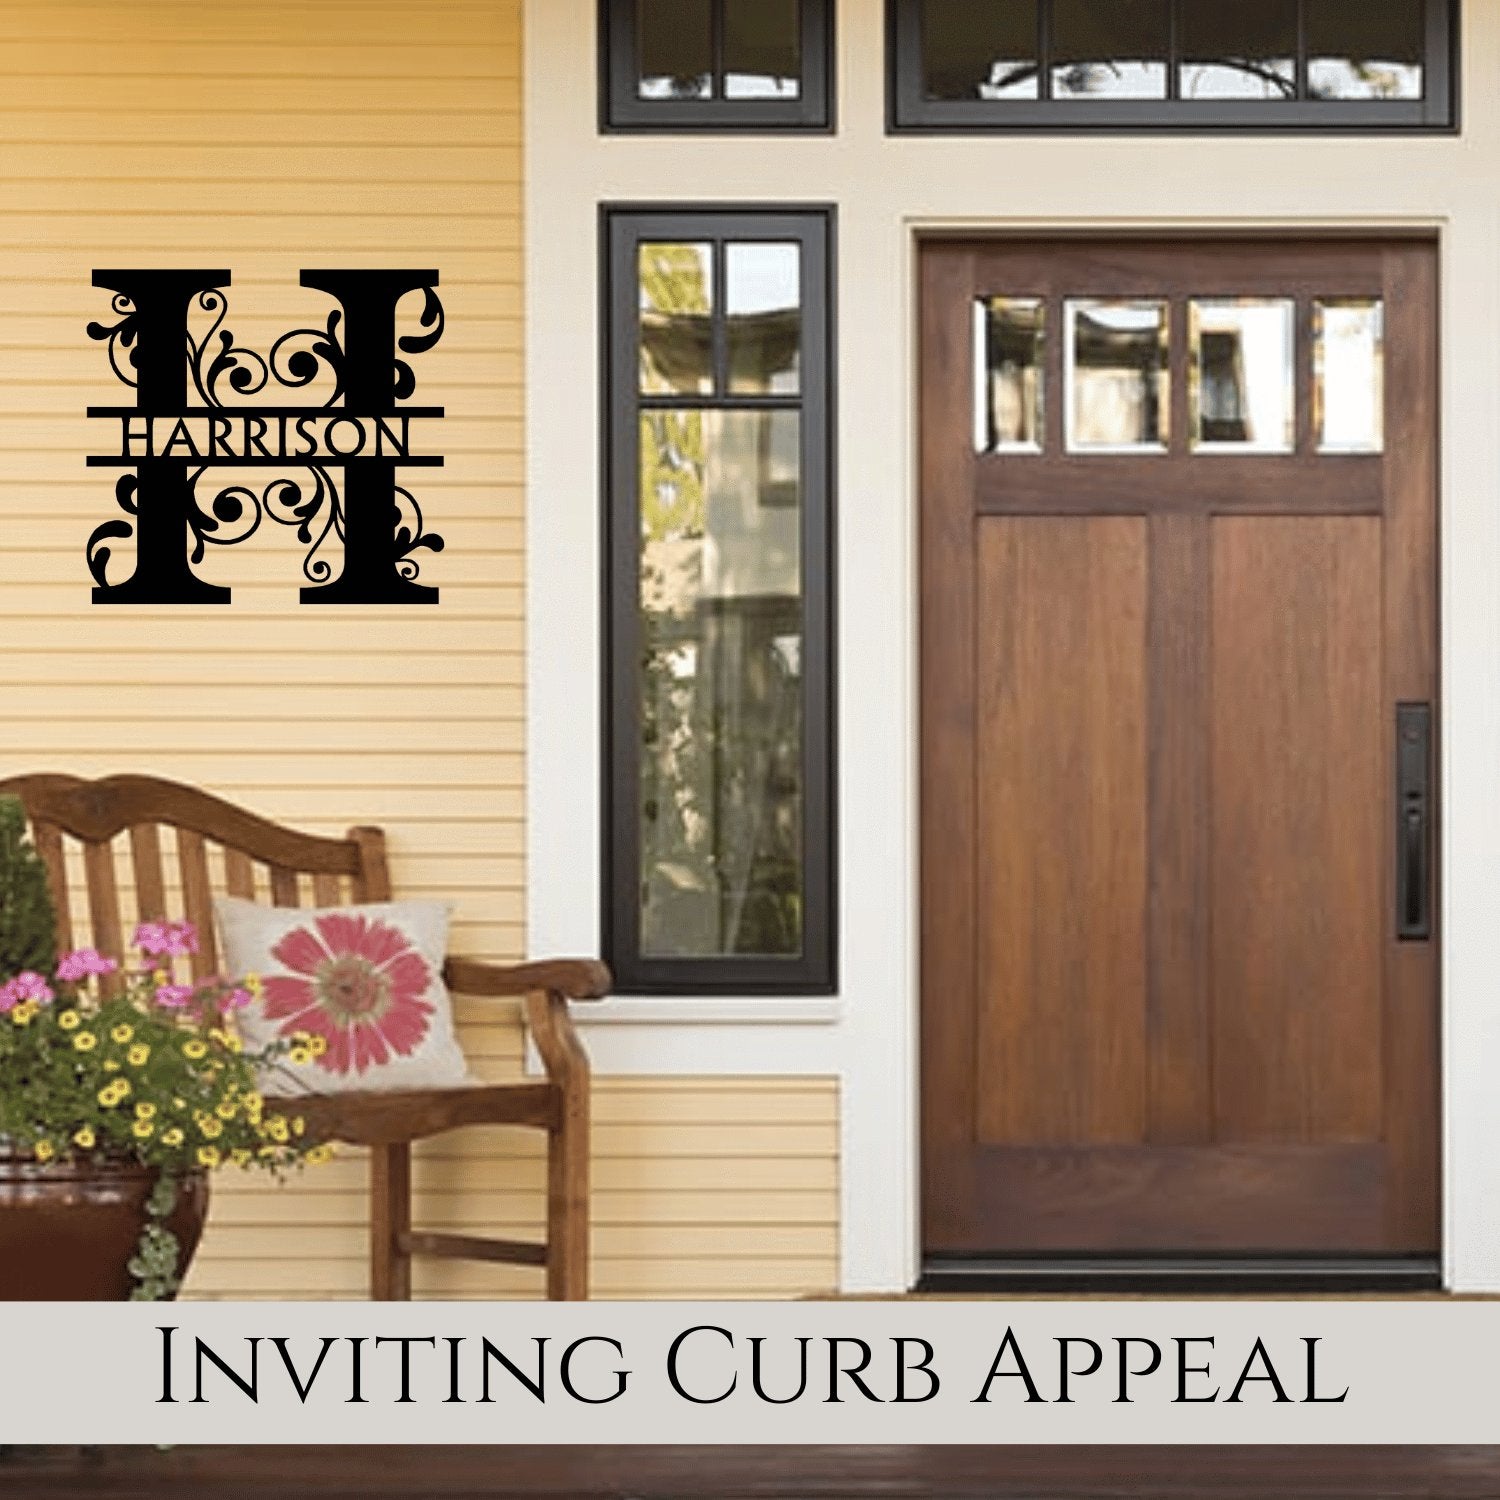 A front porch with a bench and planter. On the wall is the letter H with scroll design and the name Harrison. Underneath it says Inviting Curb Appeal